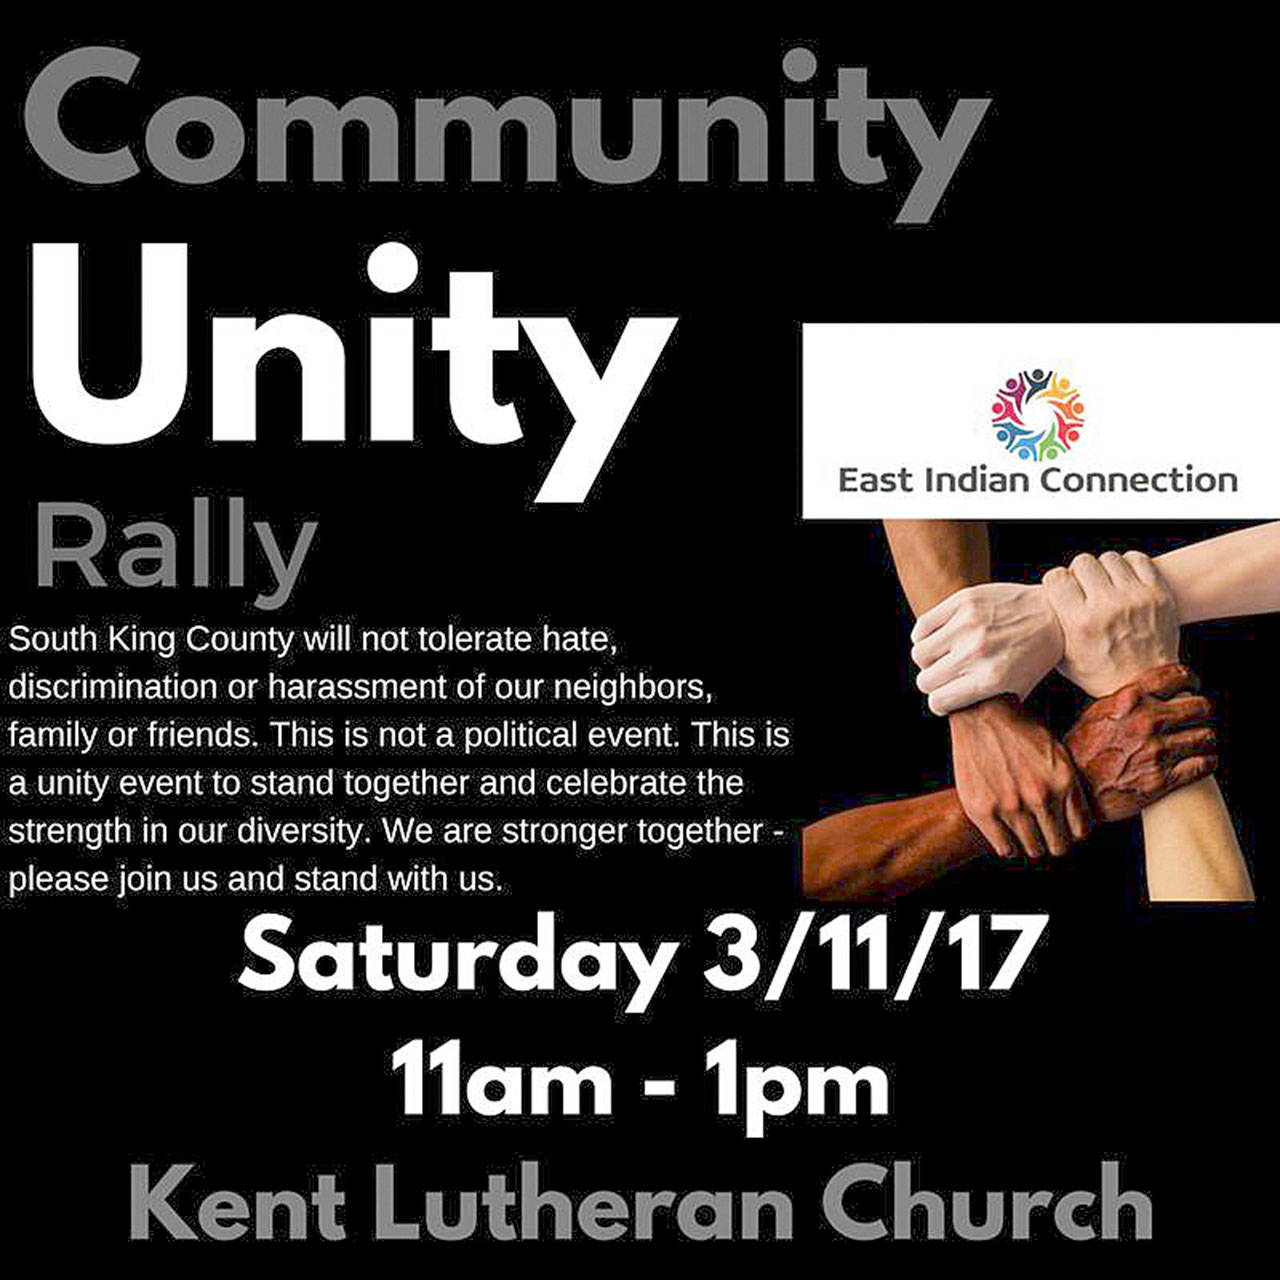 Community Unity Rally set for Saturday in Kent in response to Sikh shooting